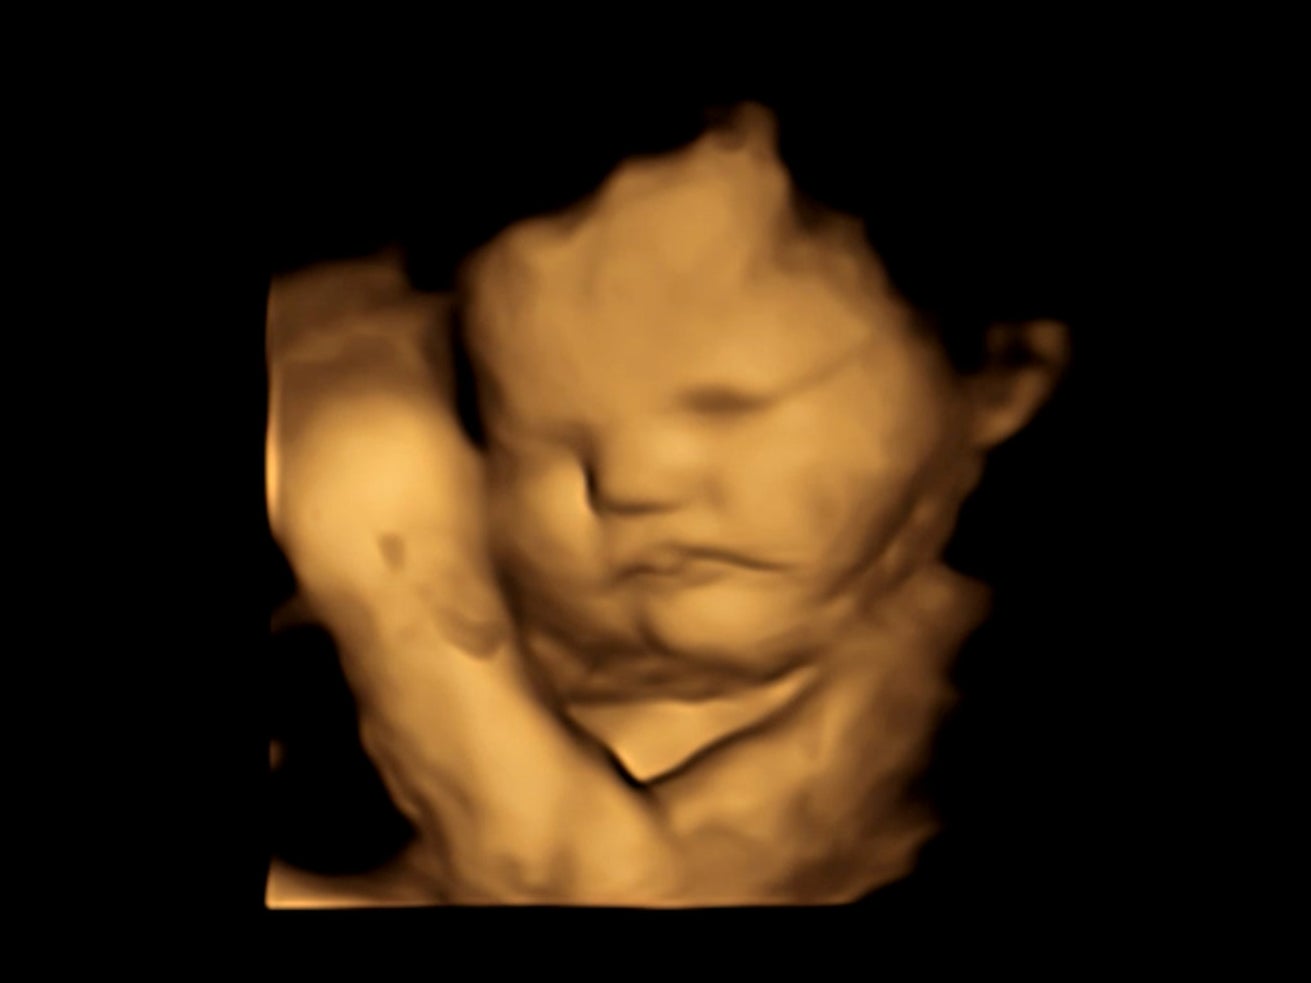 A 4D ultrasound image of a baby taken before flavours were introduced